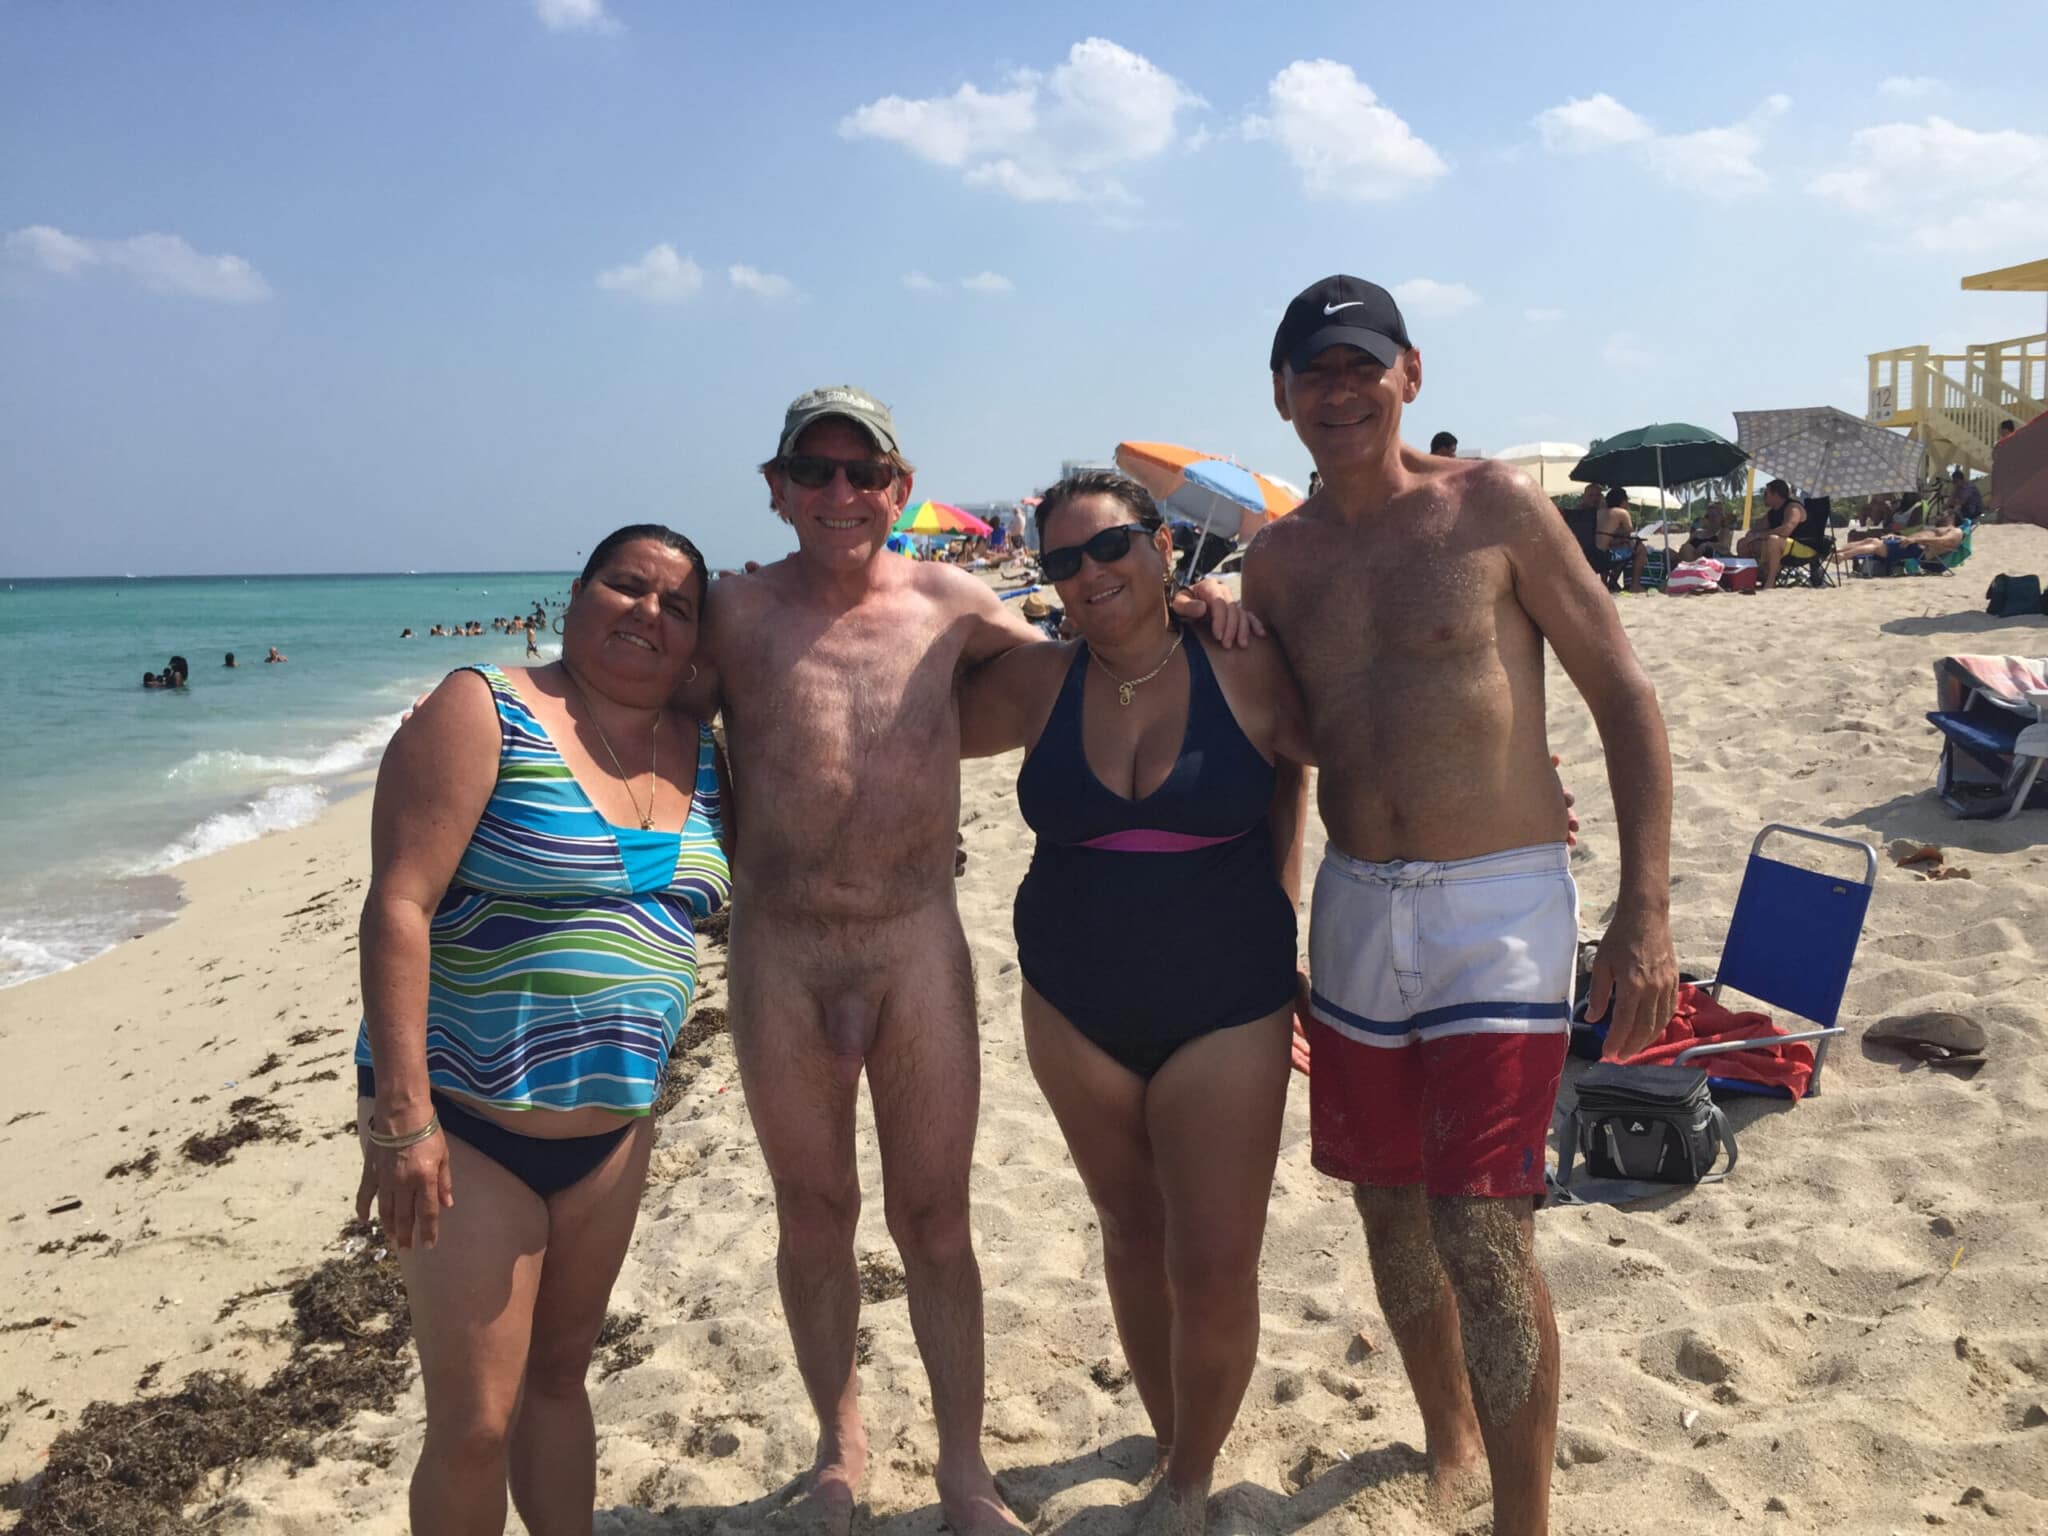 Older Milf Fucking At The Beach Cuba - Cuban Tourist Dick Flash Pics, Nude Beach Pics, Public Nudity Pics, Real  Amateurs from Google, Tumblr, Pinterest, Facebook, Twitter, Instagram and  Snapchat.